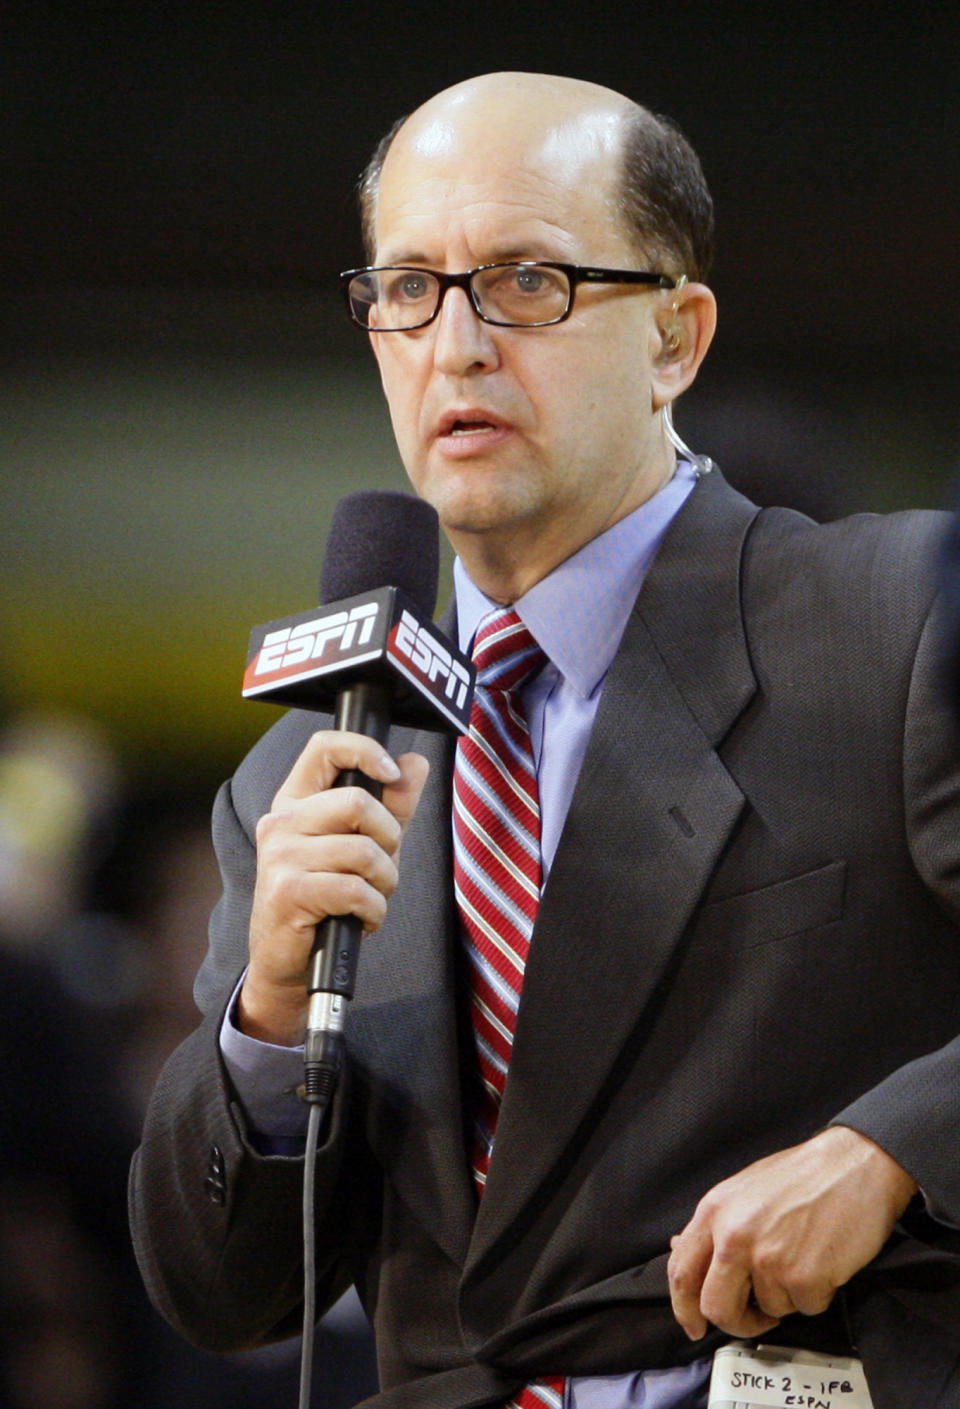 FILE - Jeff Van Gundy, ESPN NBA analyst, is shown before the start of a preseason NBA basketball game between the Miami Heat and the New Orleans Hornets in Miami, Oct. 6, 2012. Jeff Van Gundy, Suzy Kolber, Jalen Rose and Steve Young are among roughly 20 ESPN commentators and reporters who were laid off on Friday, June 30, 2023, as part of job cuts by the network. (AP Photo/Wilfredo Lee, File)